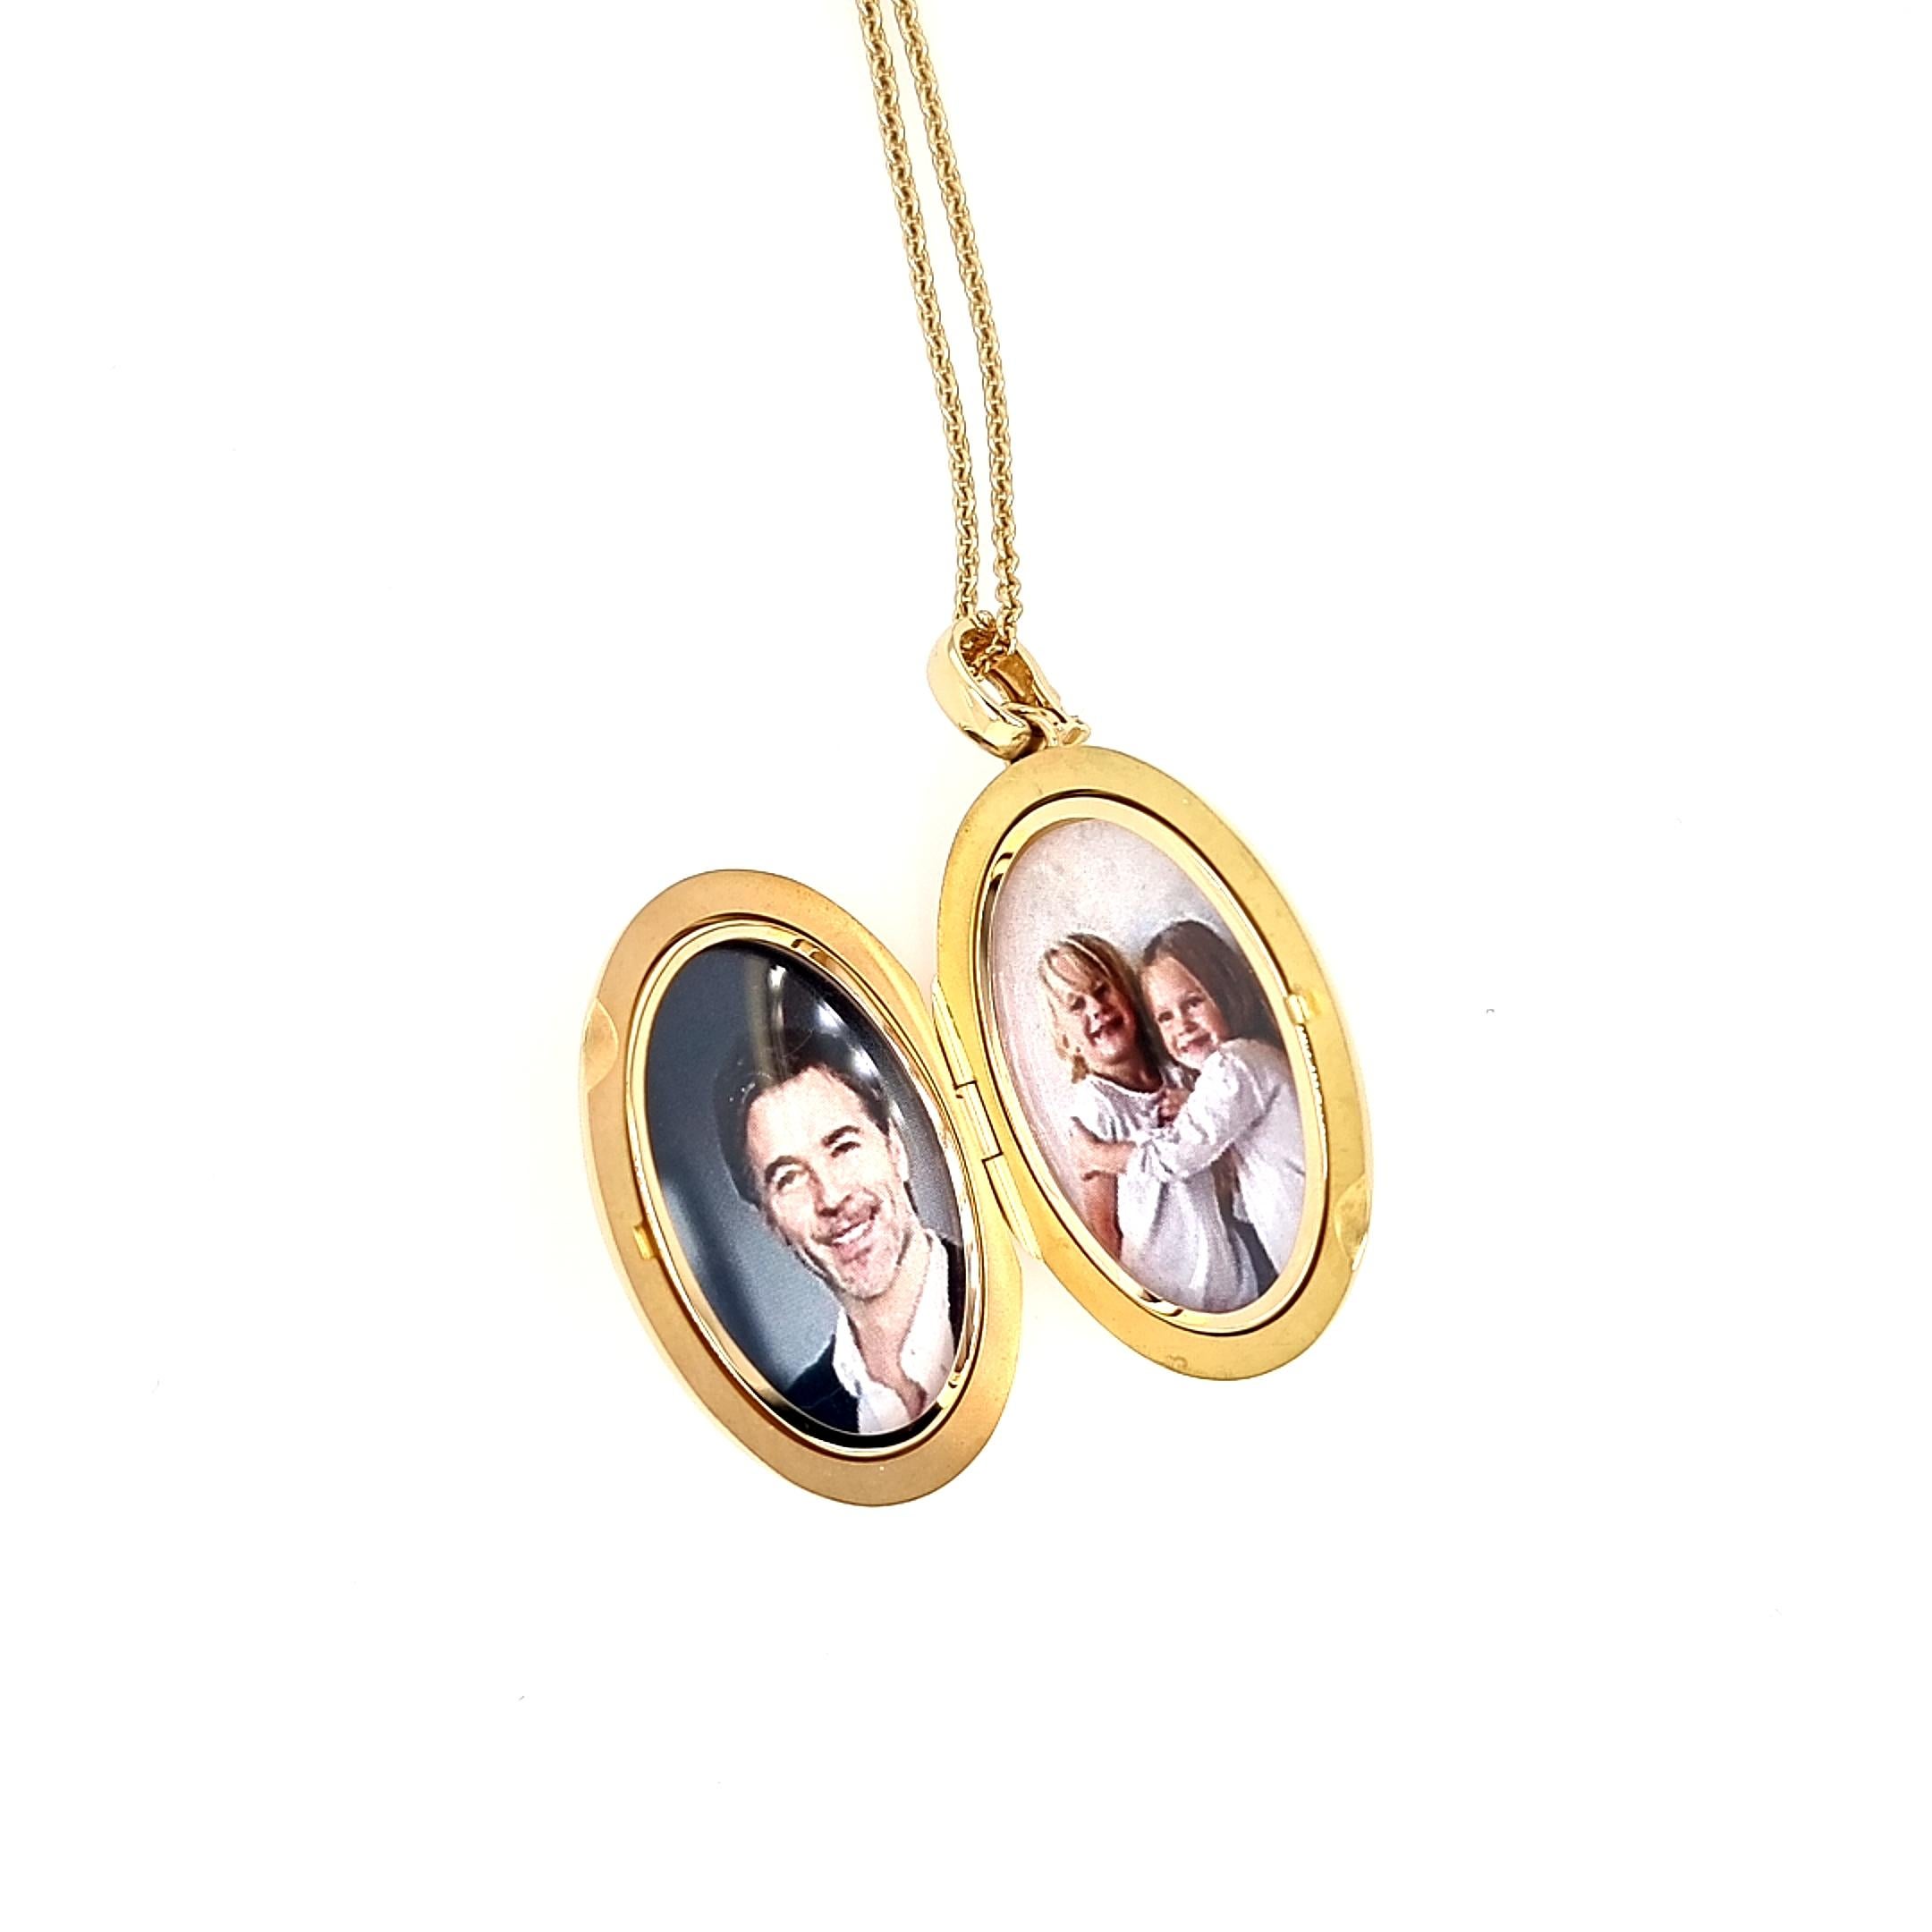 Oval Locket Pendant Necklace and Enamel Link Chain 18k Yellow Gold In New Condition For Sale In Pforzheim, DE